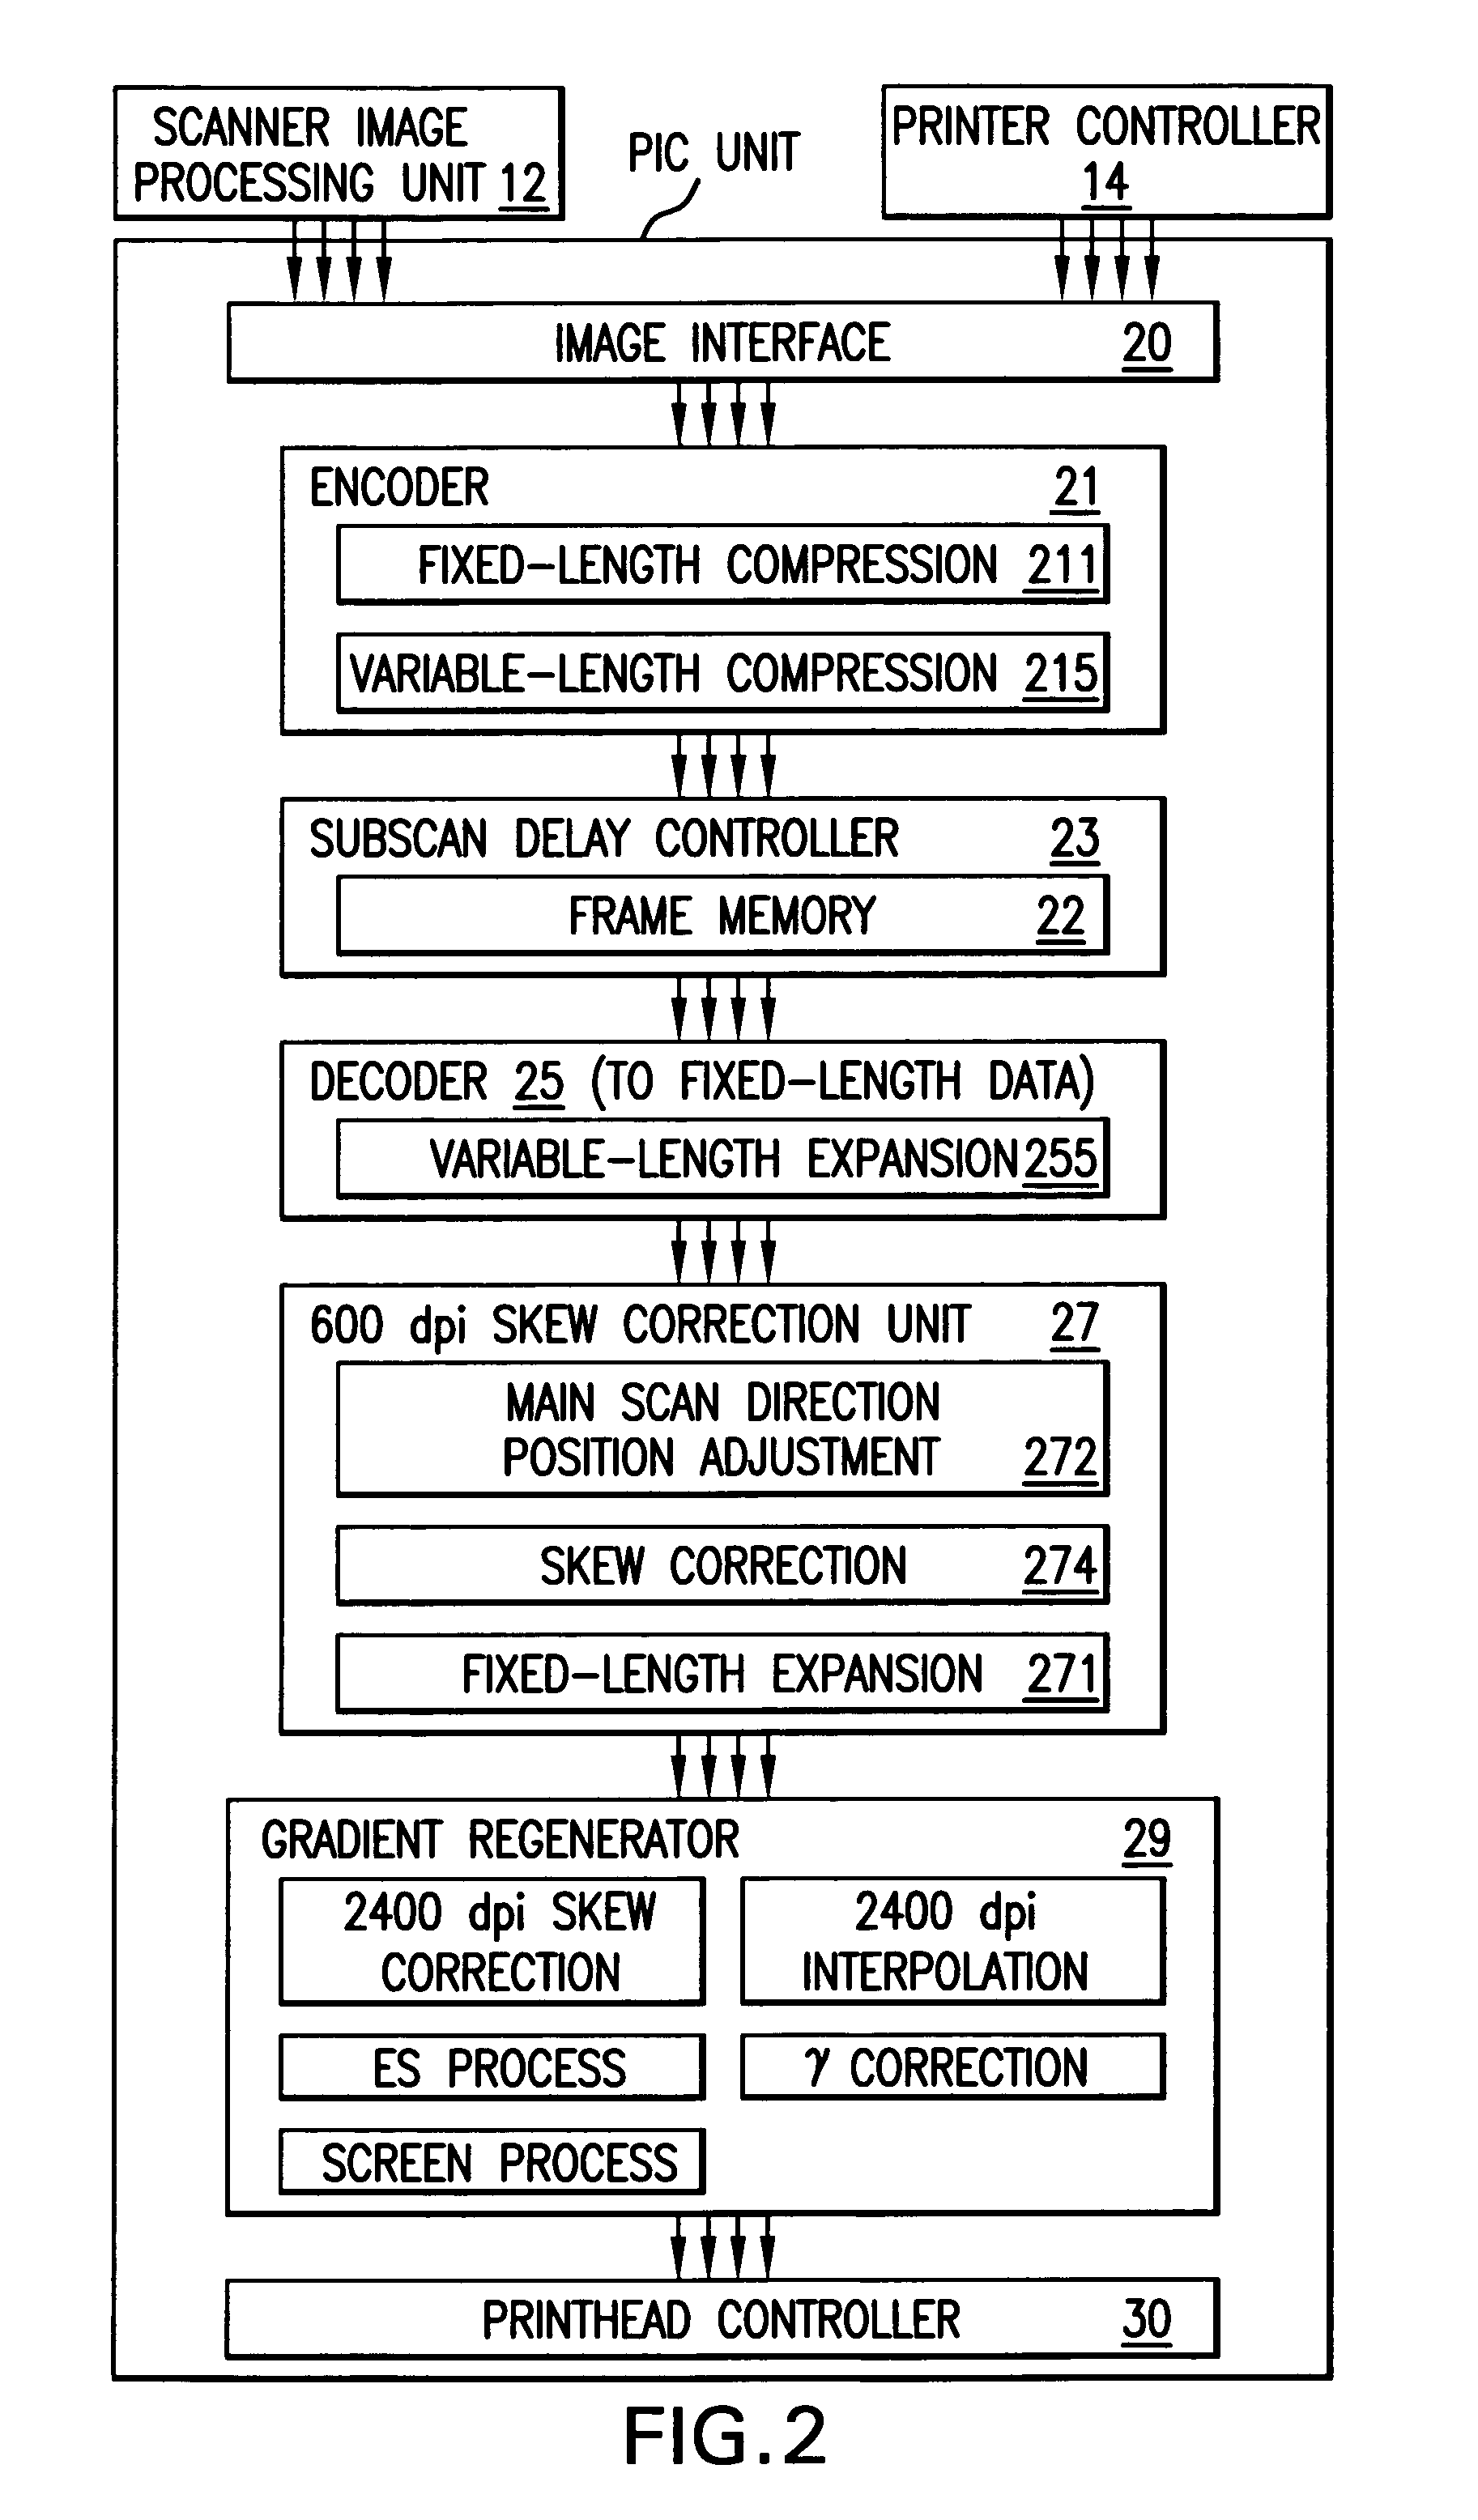 Image processing apparatus for compressing image data with optimum compression method corresponding to image size thereof